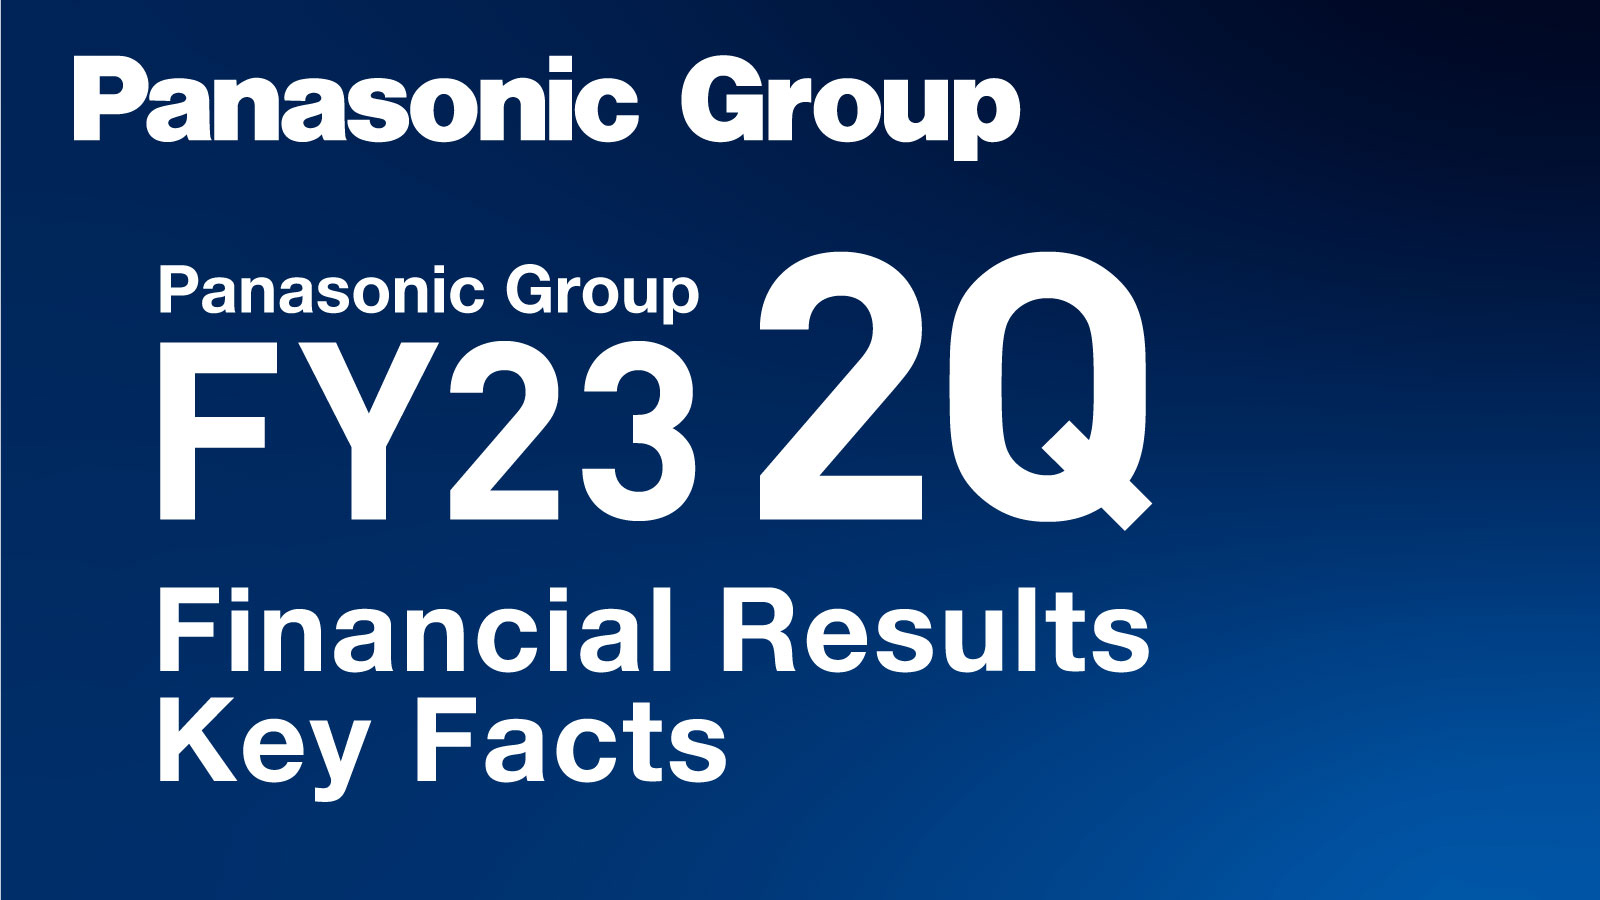 Note: Panasonic Group Q2 FY2023 Financial Results Key Facts